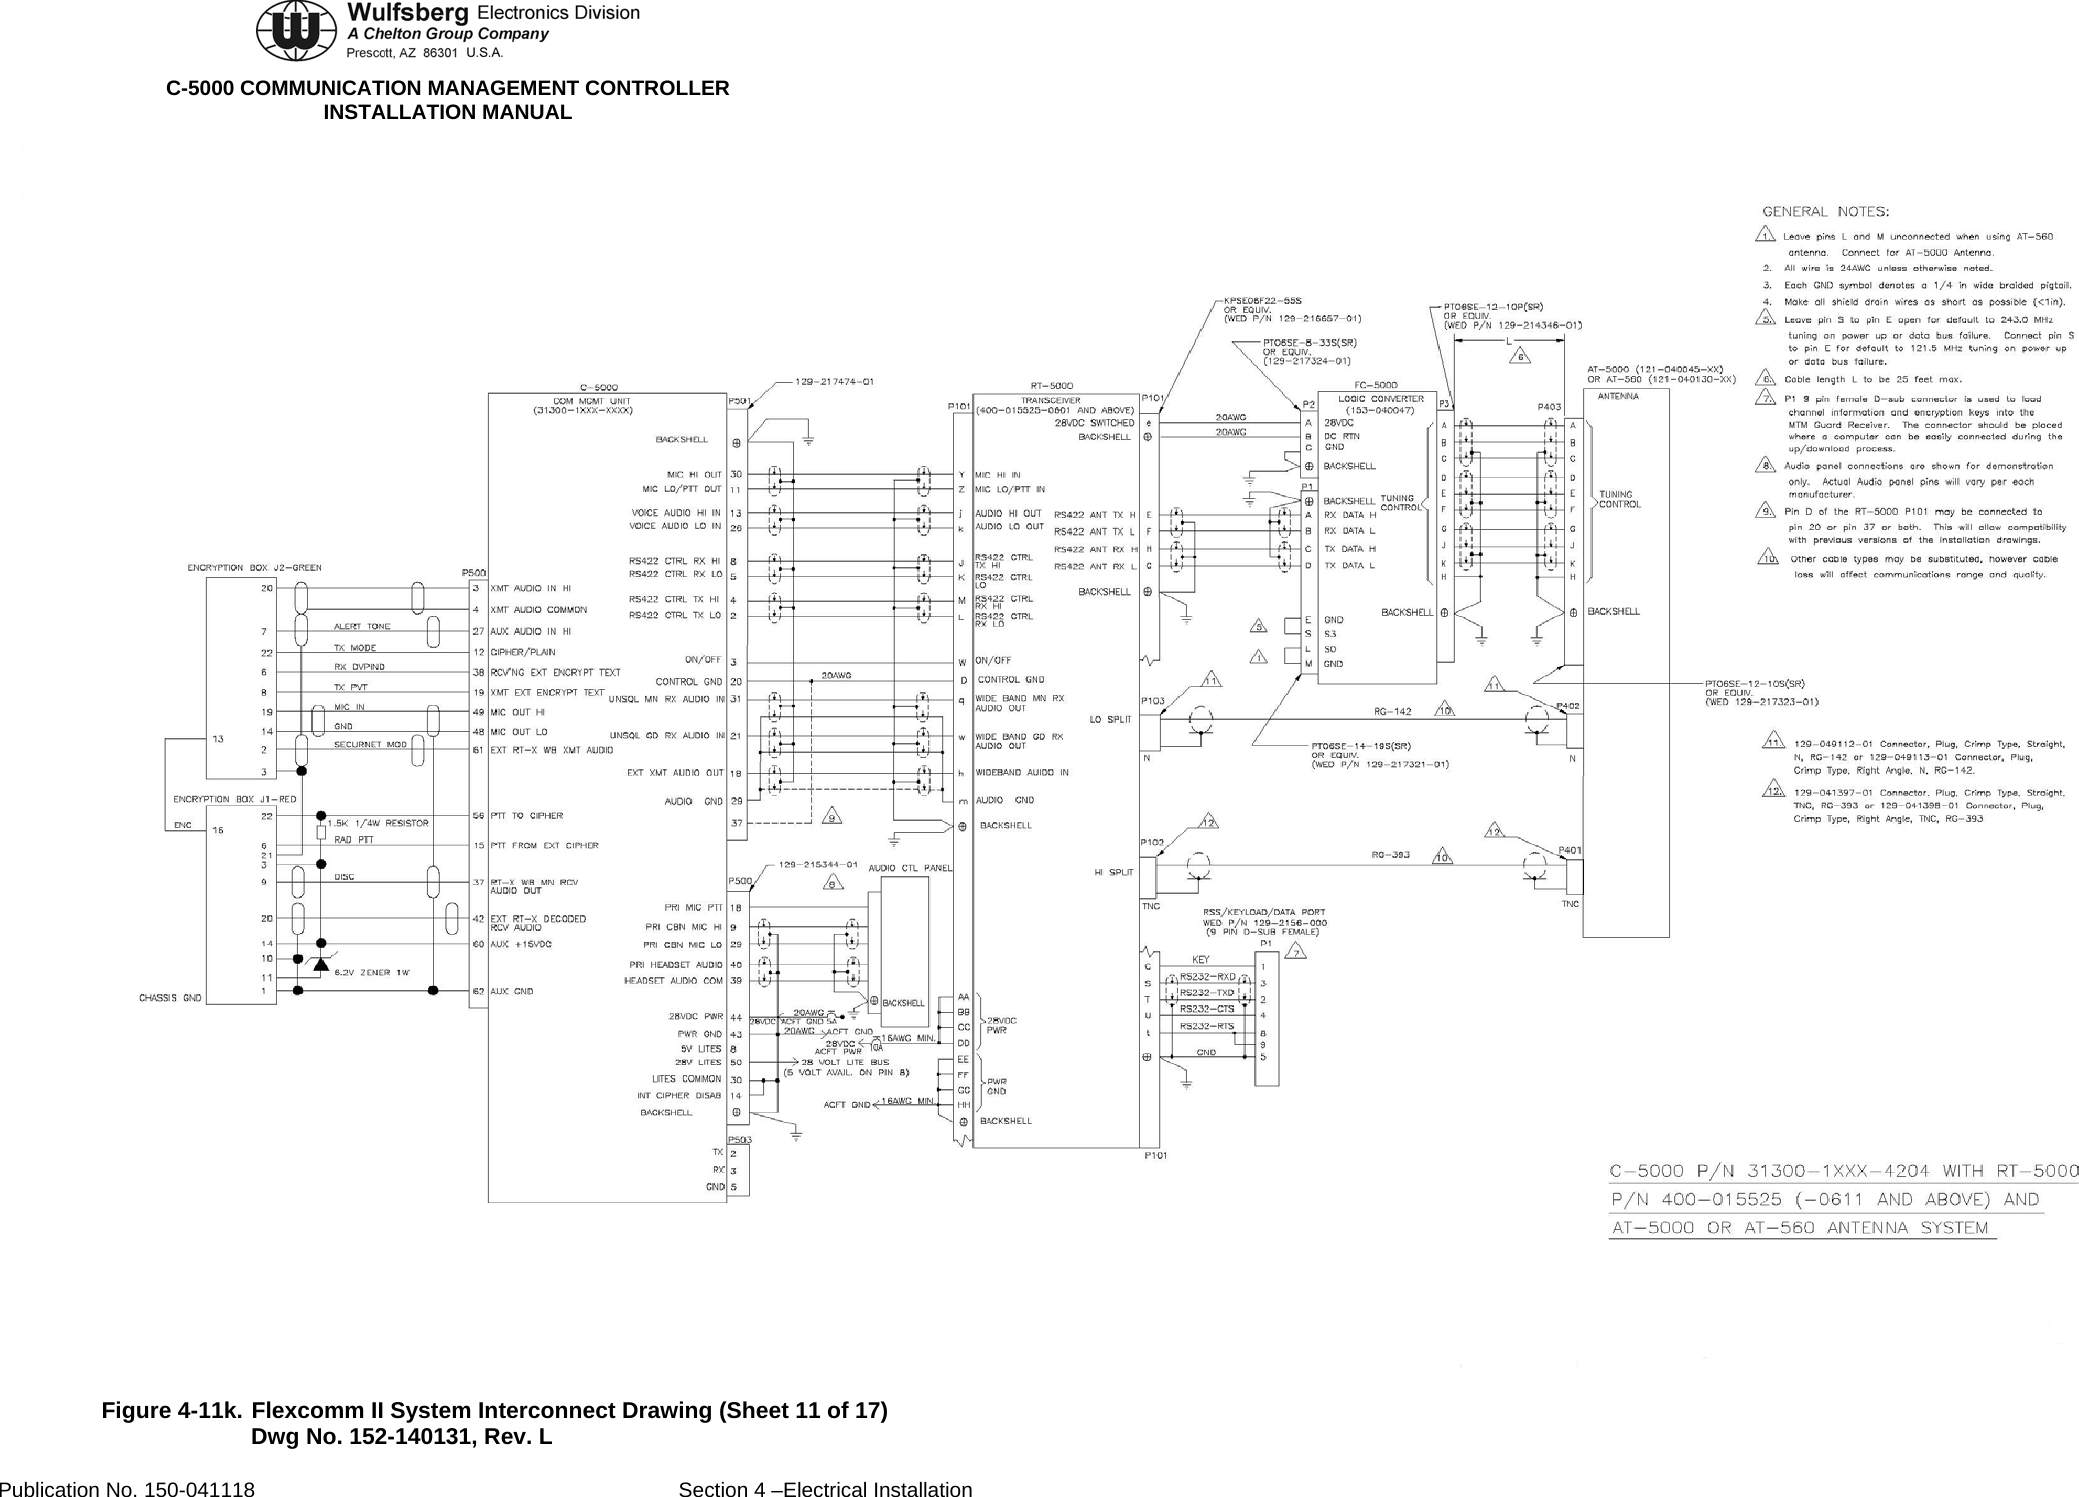  C-5000 COMMUNICATION MANAGEMENT CONTROLLER INSTALLATION MANUAL  Figure 4-11k. Flexcomm II System Interconnect Drawing (Sheet 11 of 17) Dwg No. 152-140131, Rev. L Publication No. 150-041118  Section 4 –Electrical Installation 